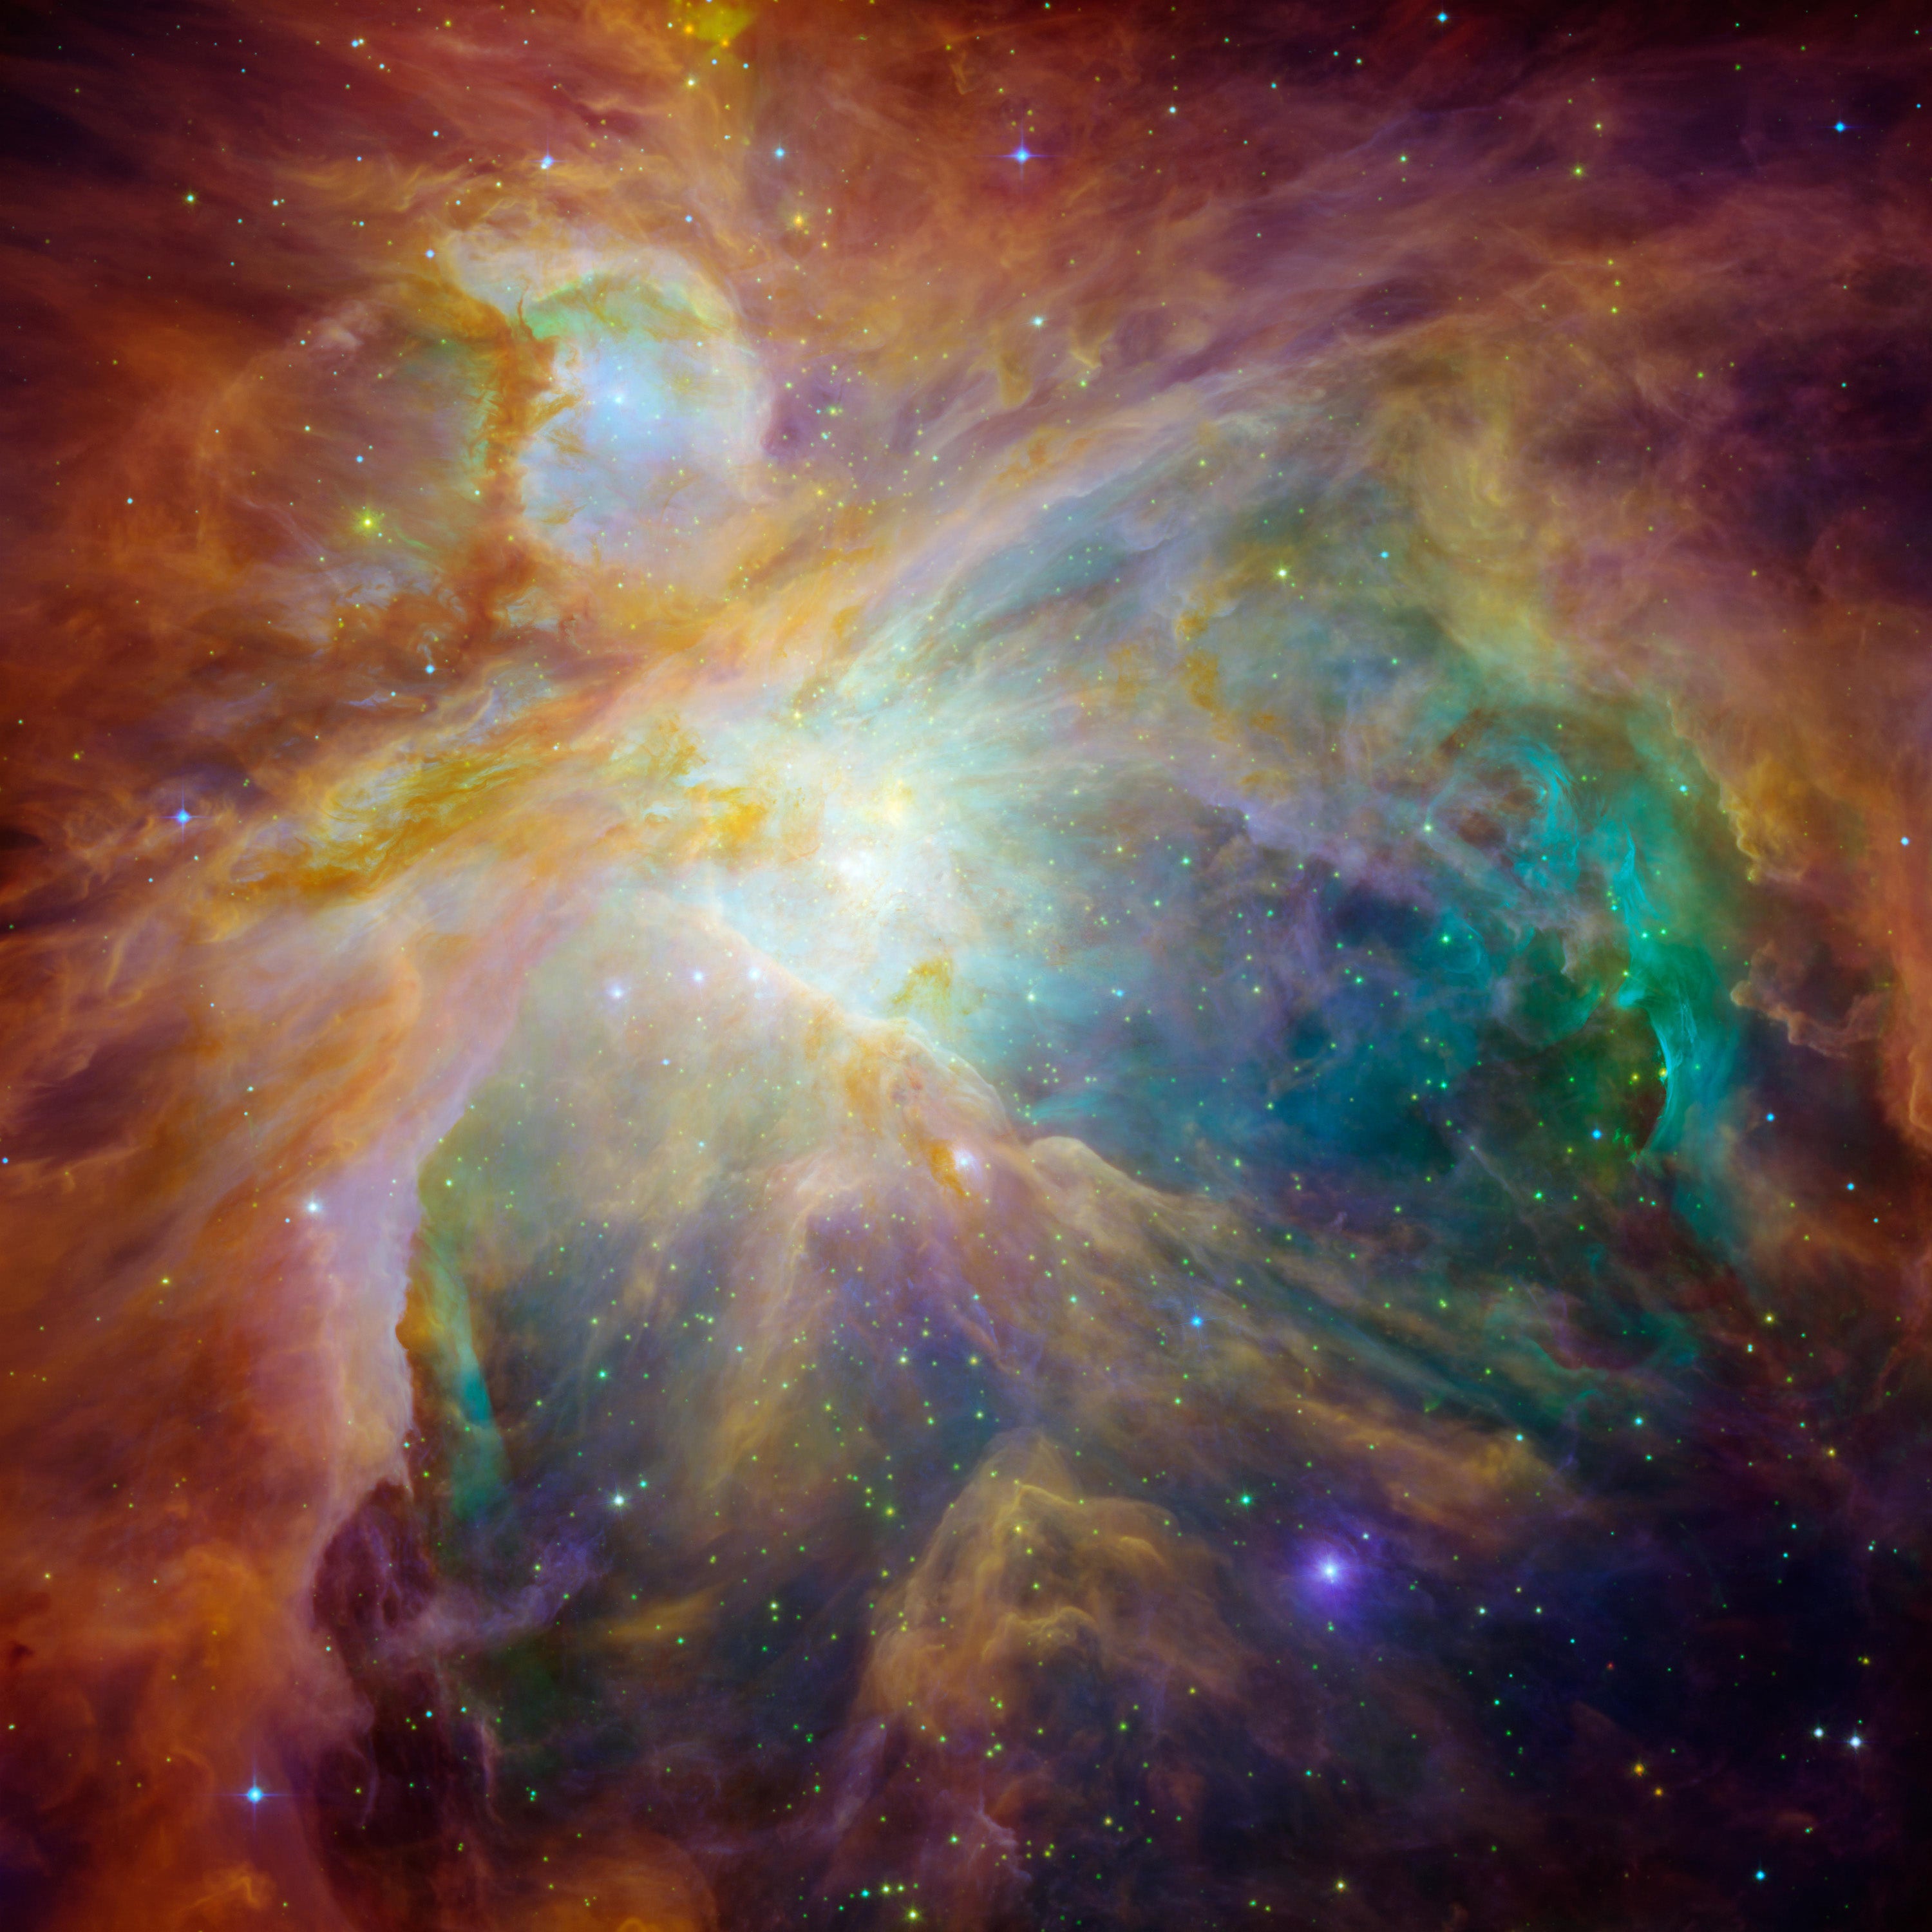 Nascent stars form in the Orion Nebula.